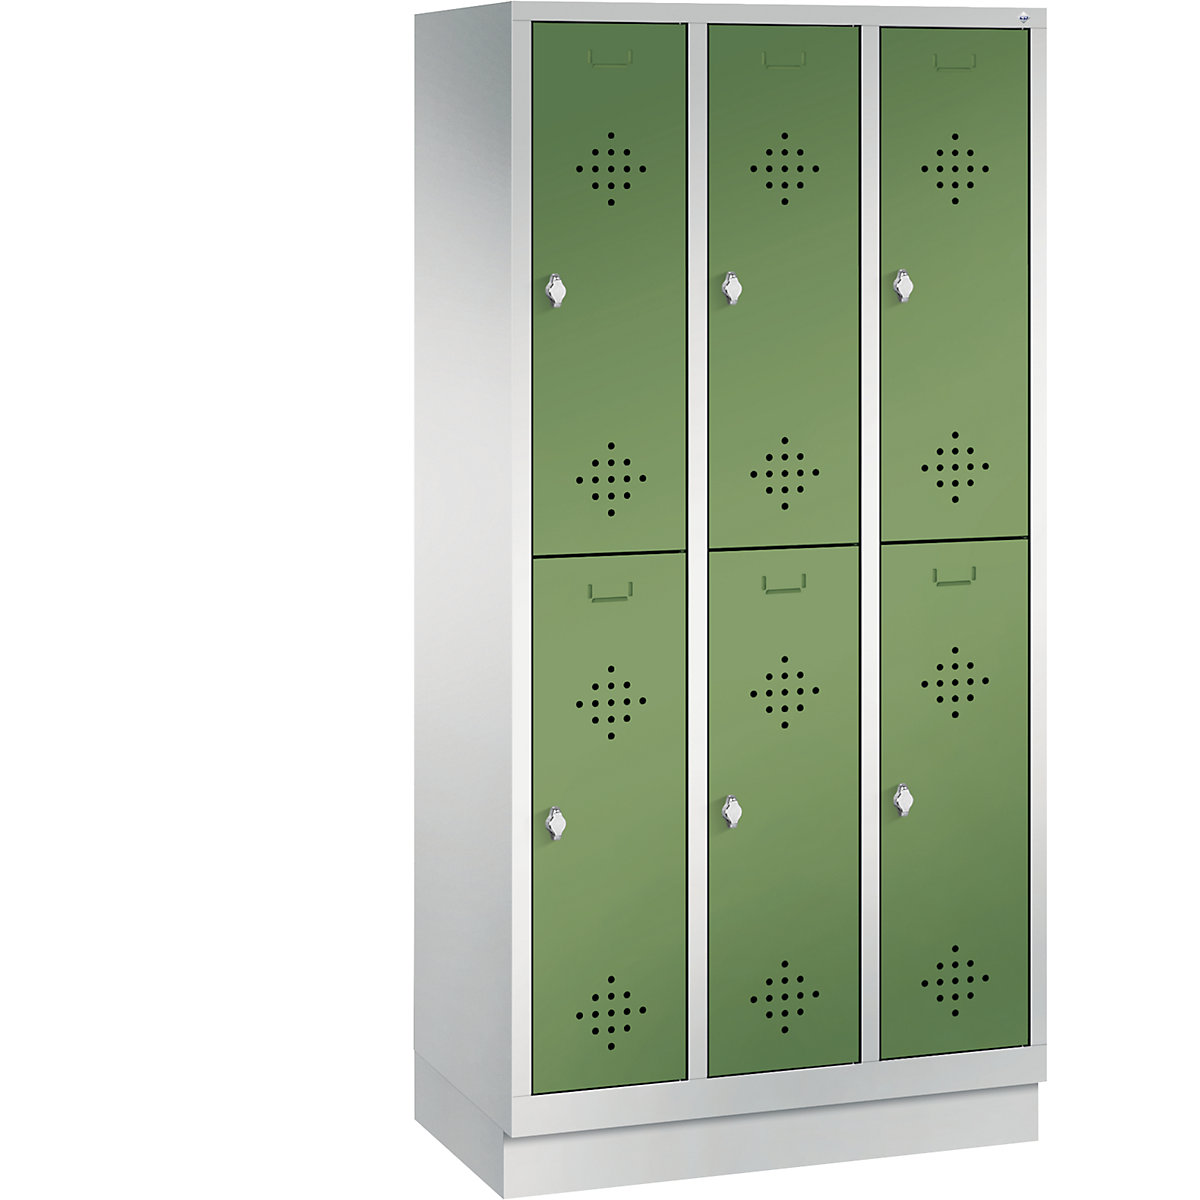 CLASSIC cloakroom locker with plinth, double tier – C+P, 3 compartments, 2 shelf compartments each, compartment width 300 mm, light grey / reseda green-8